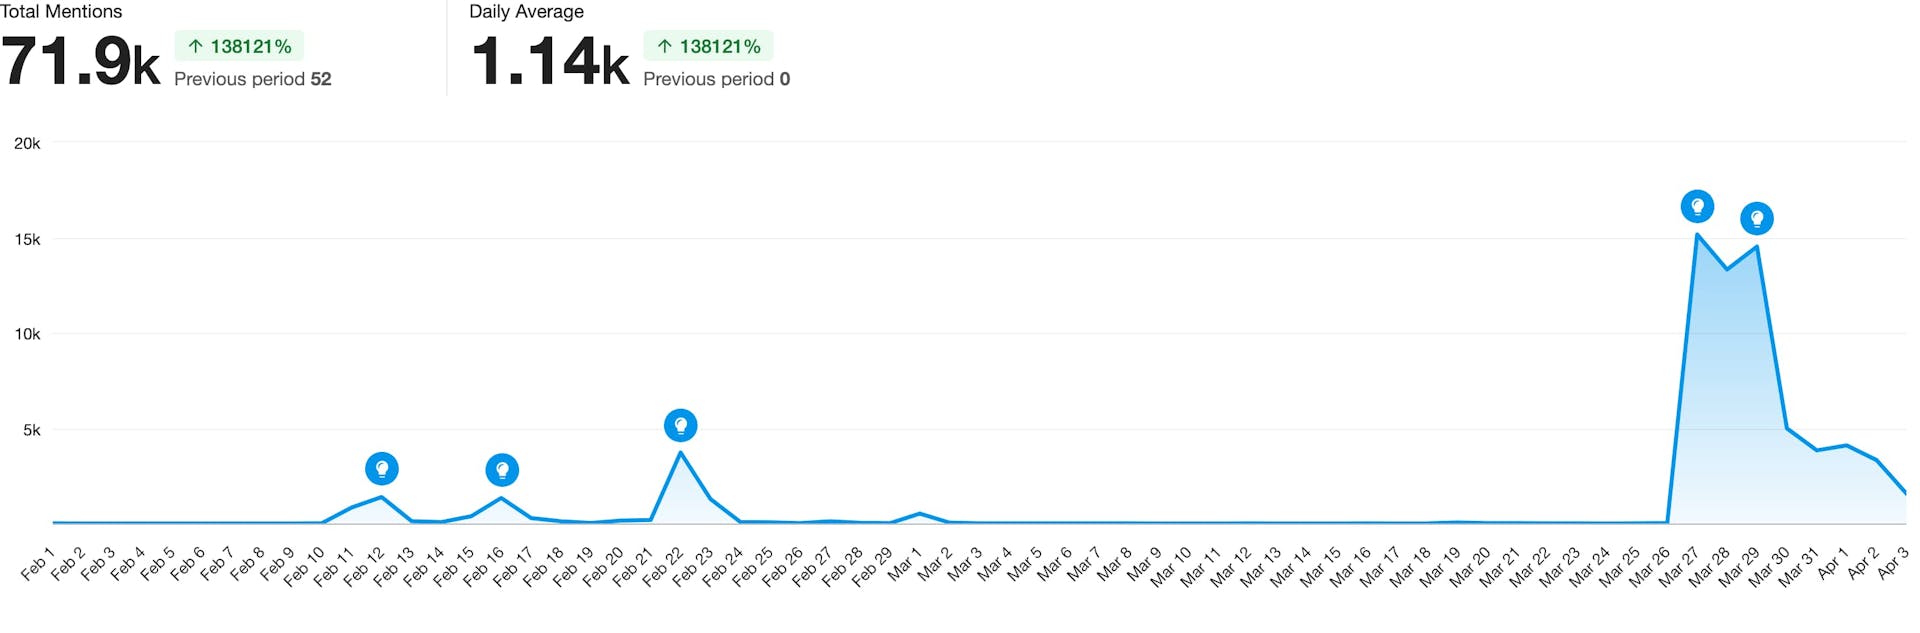 A chart showing mentions of Linda Martell from February 1 through April 3 with a total of 71.9k.